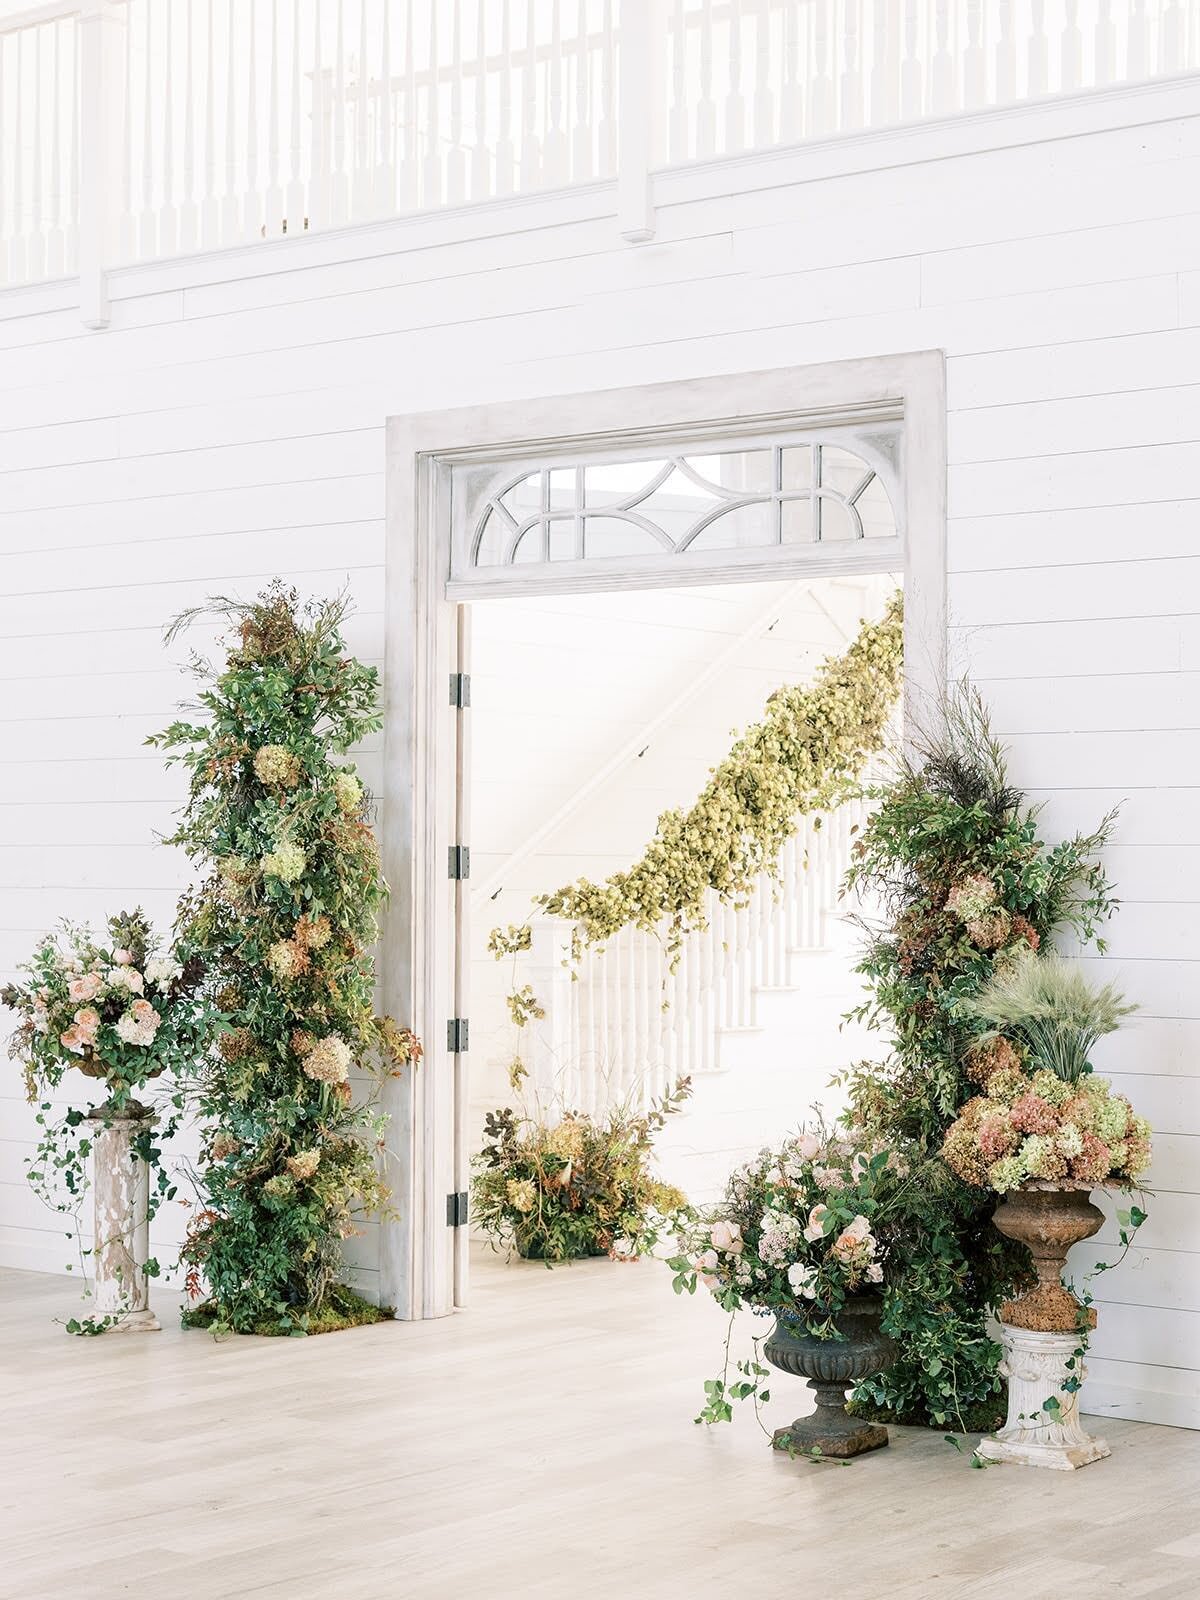 White french doors open to showcase a staircase decorated with lush floral installation